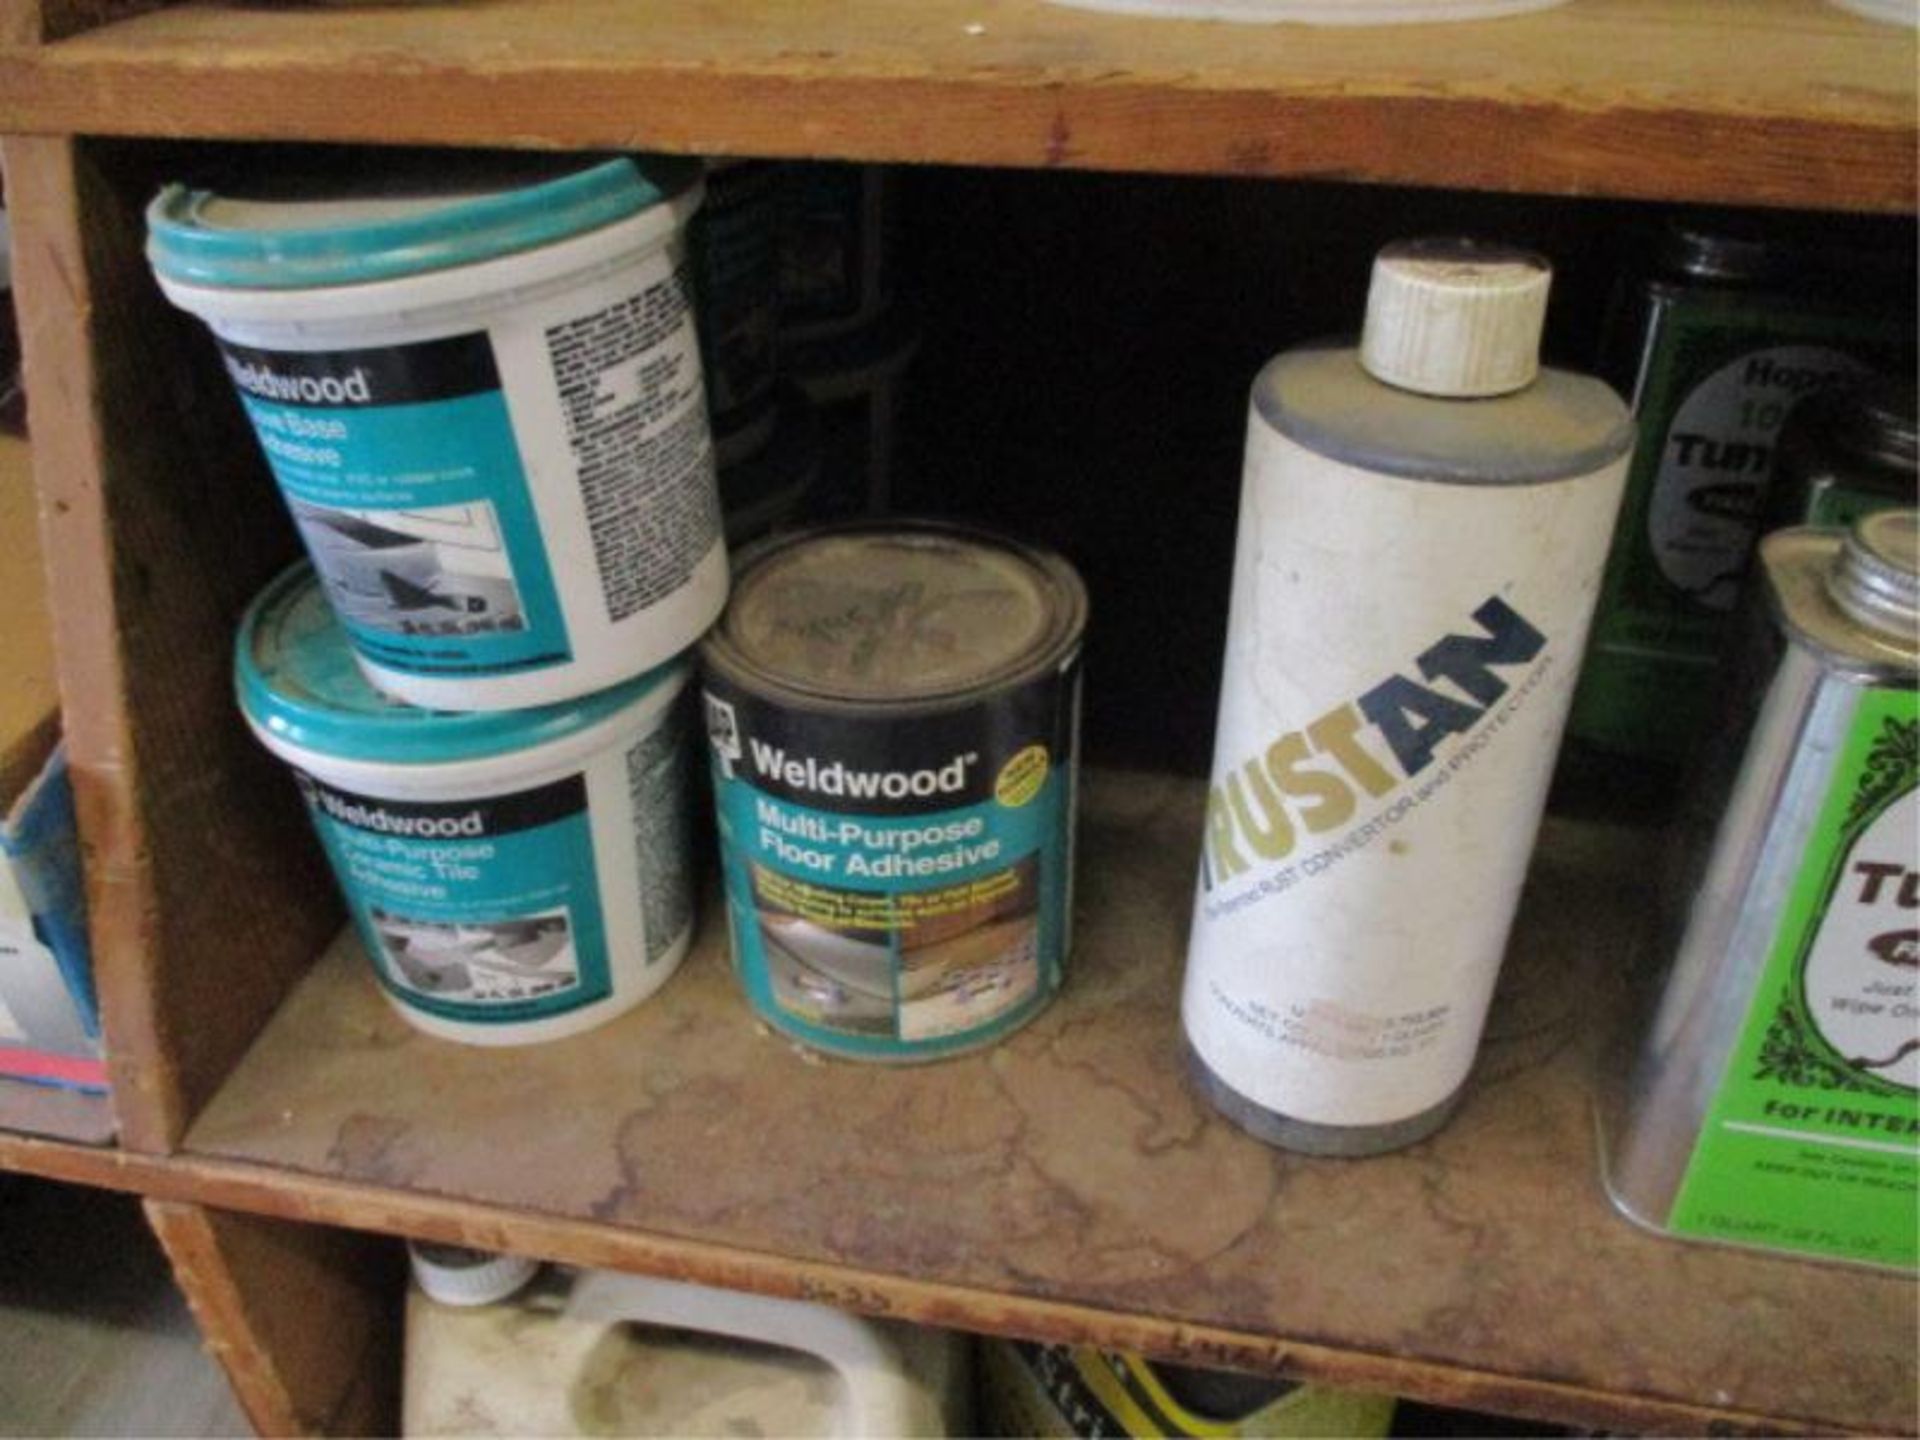 3 Shelves w/ Joint Compound, Water Putty, Tung Oil, Floor Adhesive, Deck Cleaner, Zip-Strip, B-I-N - Image 6 of 10